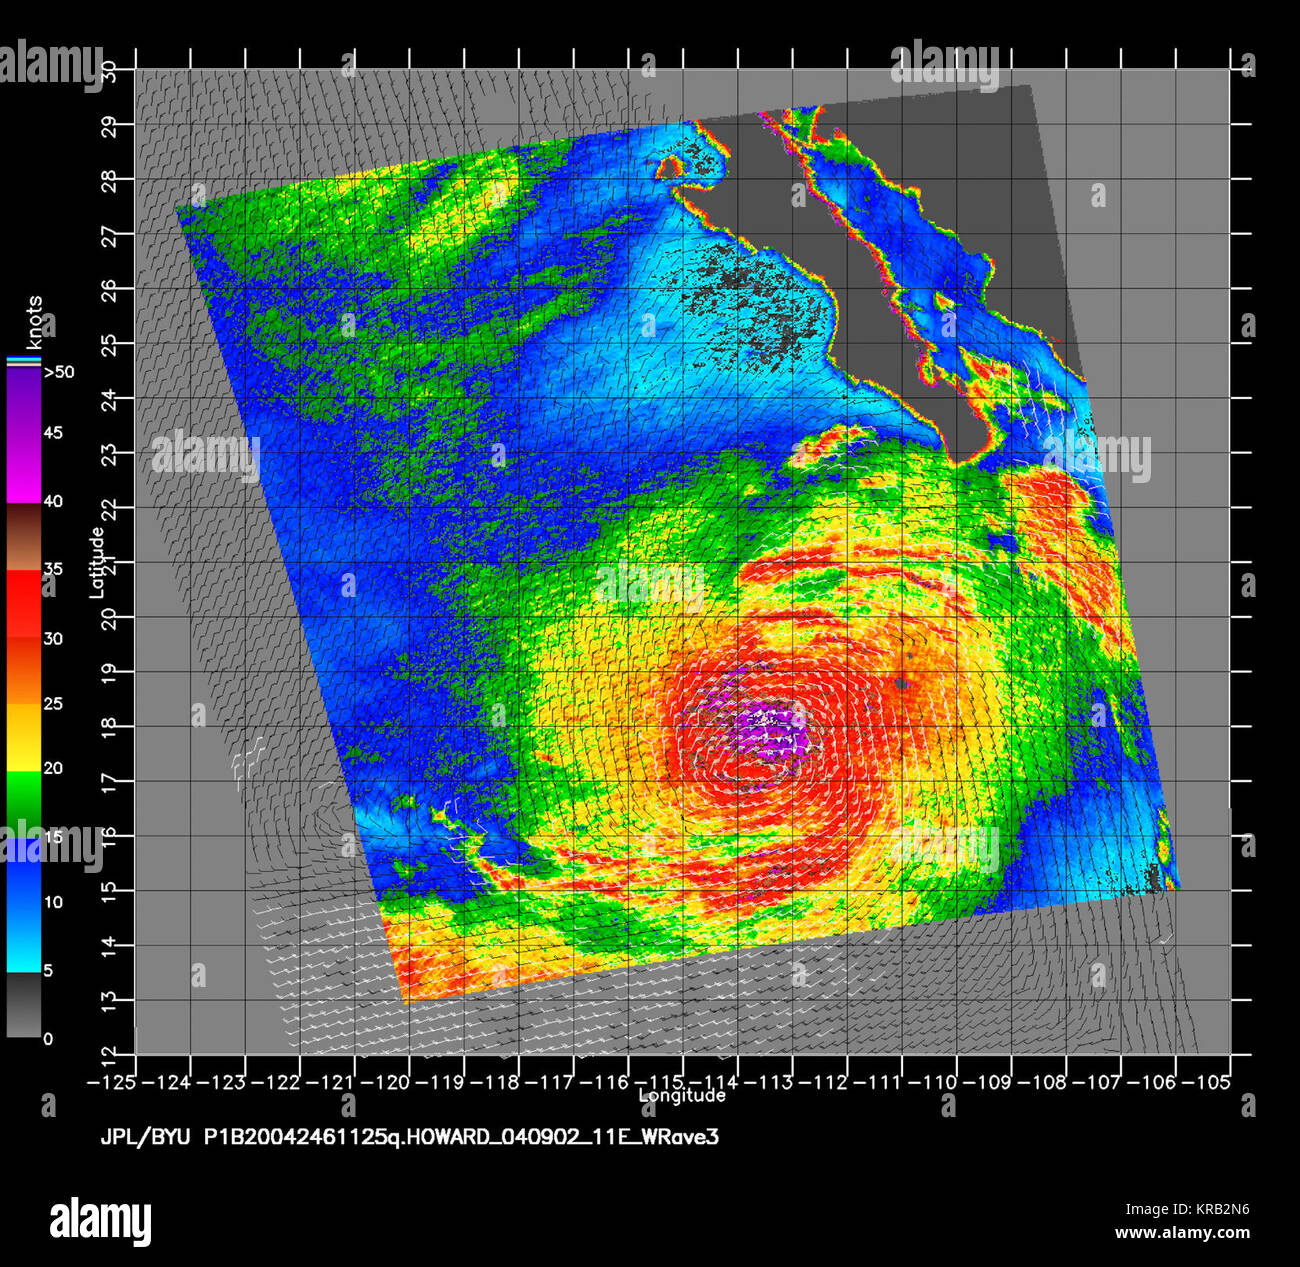 <p>The SeaWinds scatterometer aboard NASA's QuikSCAT satellite collected the data used to create this multicolored image of hurricane Howard off the Southern Coast of Cabo San Lucas, Mexico. This image taken on September 2nd at 4:25pm PDT, shows near-surface winds 10 meters above the ocean surface. </p>   <p>The colored background shows the near-surface wind speeds at 2.5 km resolution, with the highest wind speeds, purple, in the center, and lower wind speeds around the outer edges of the storm. The black barbs indicate wind speed and direction at QuikSCAT's nominal 25 km resolution; white ba Stock Photo